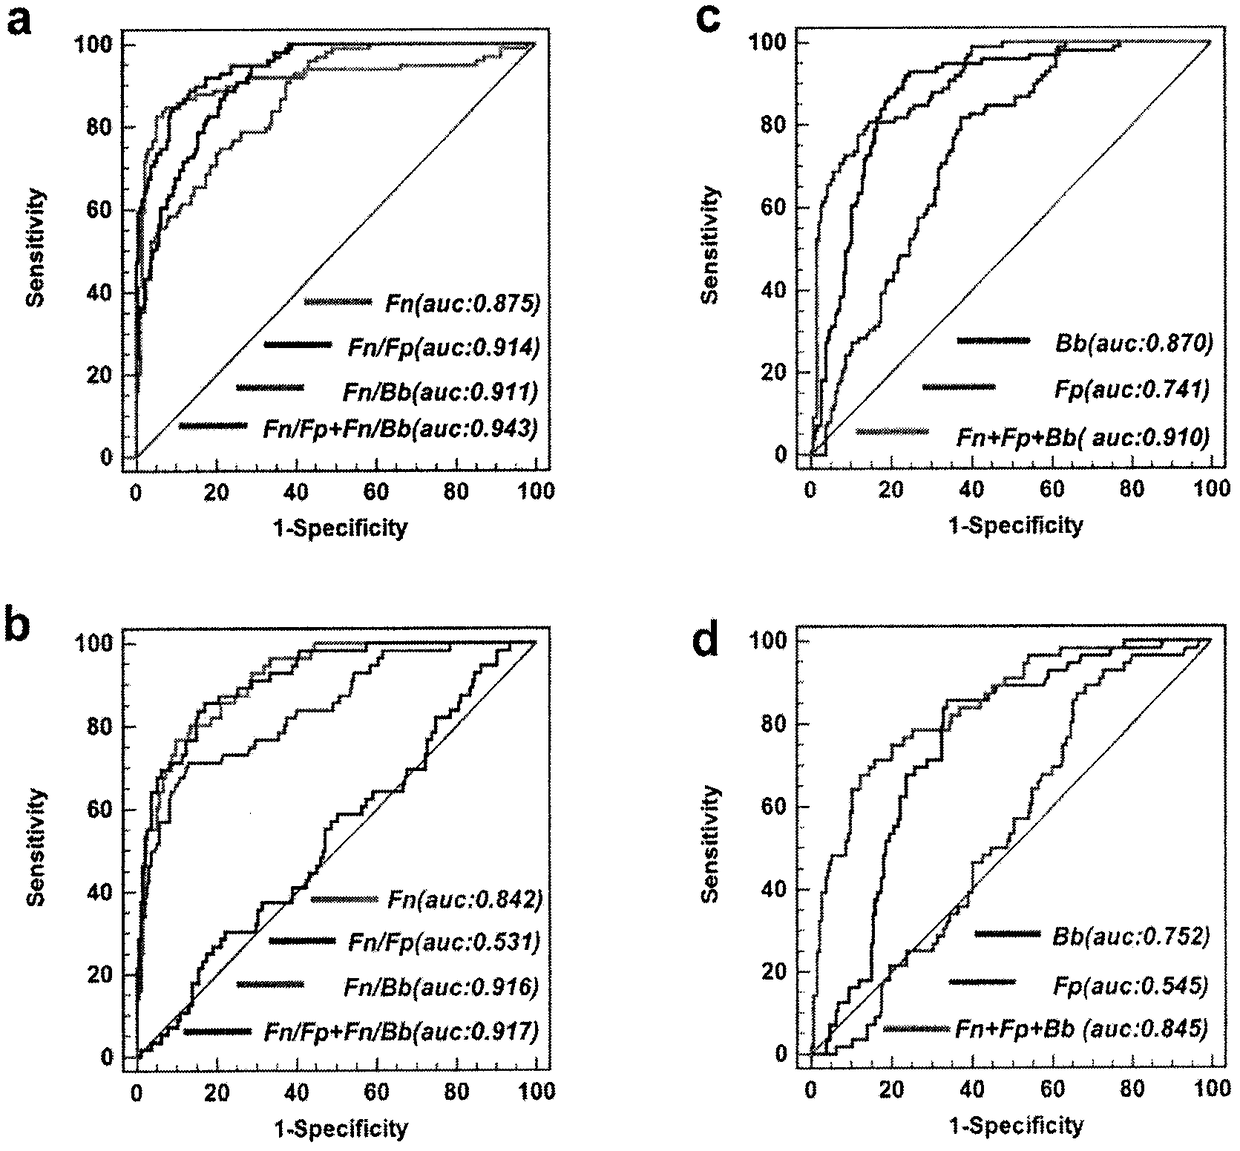 Method for evaluating stable state of flora in excrement sample and application of method in colorectal cancer screening